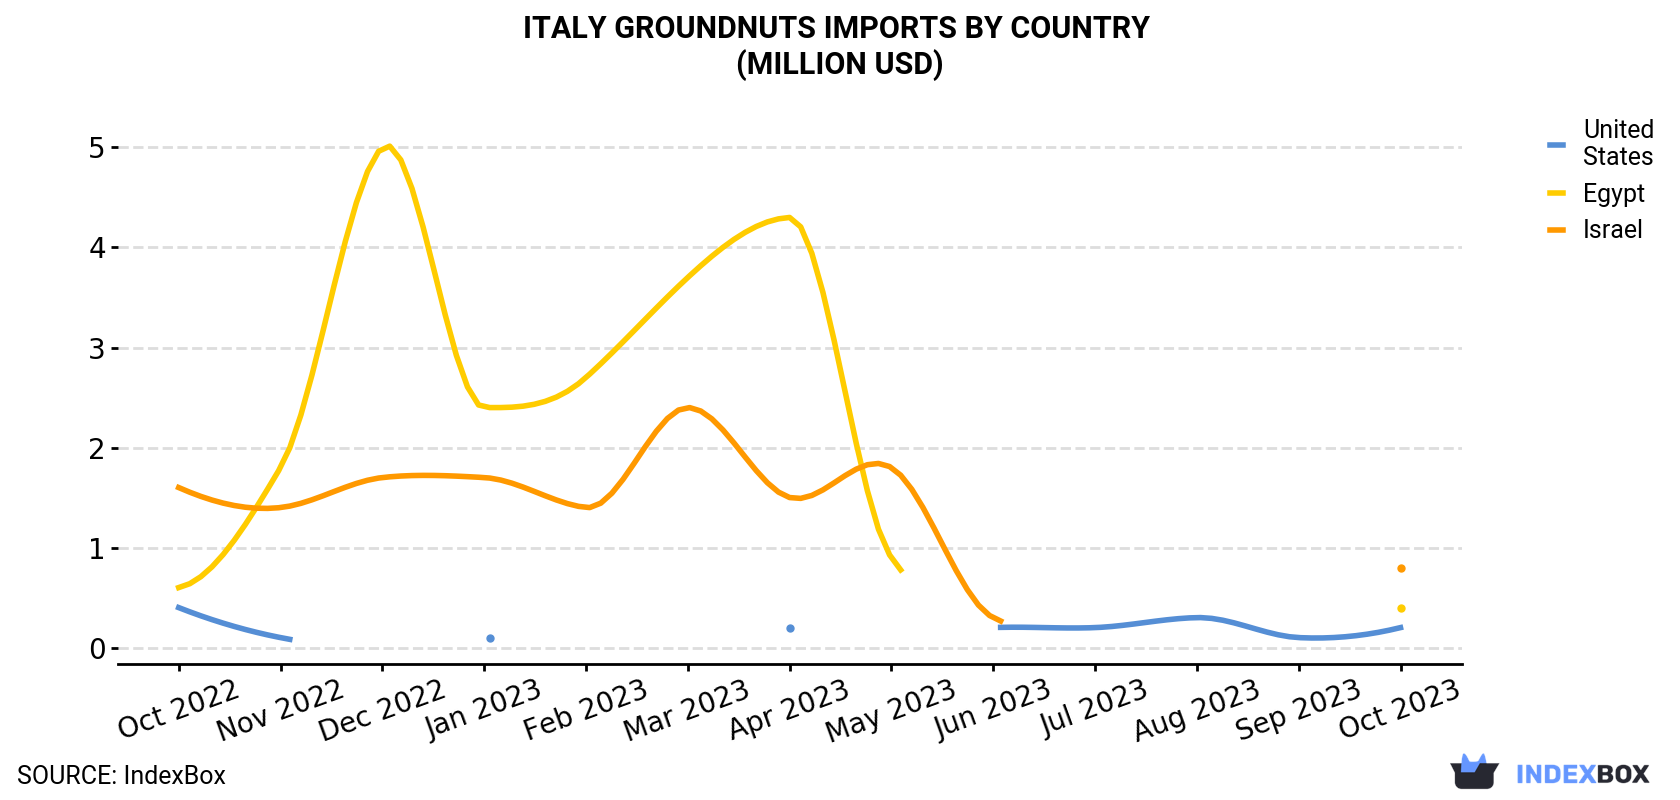 Italy Groundnuts Imports By Country (Million USD)